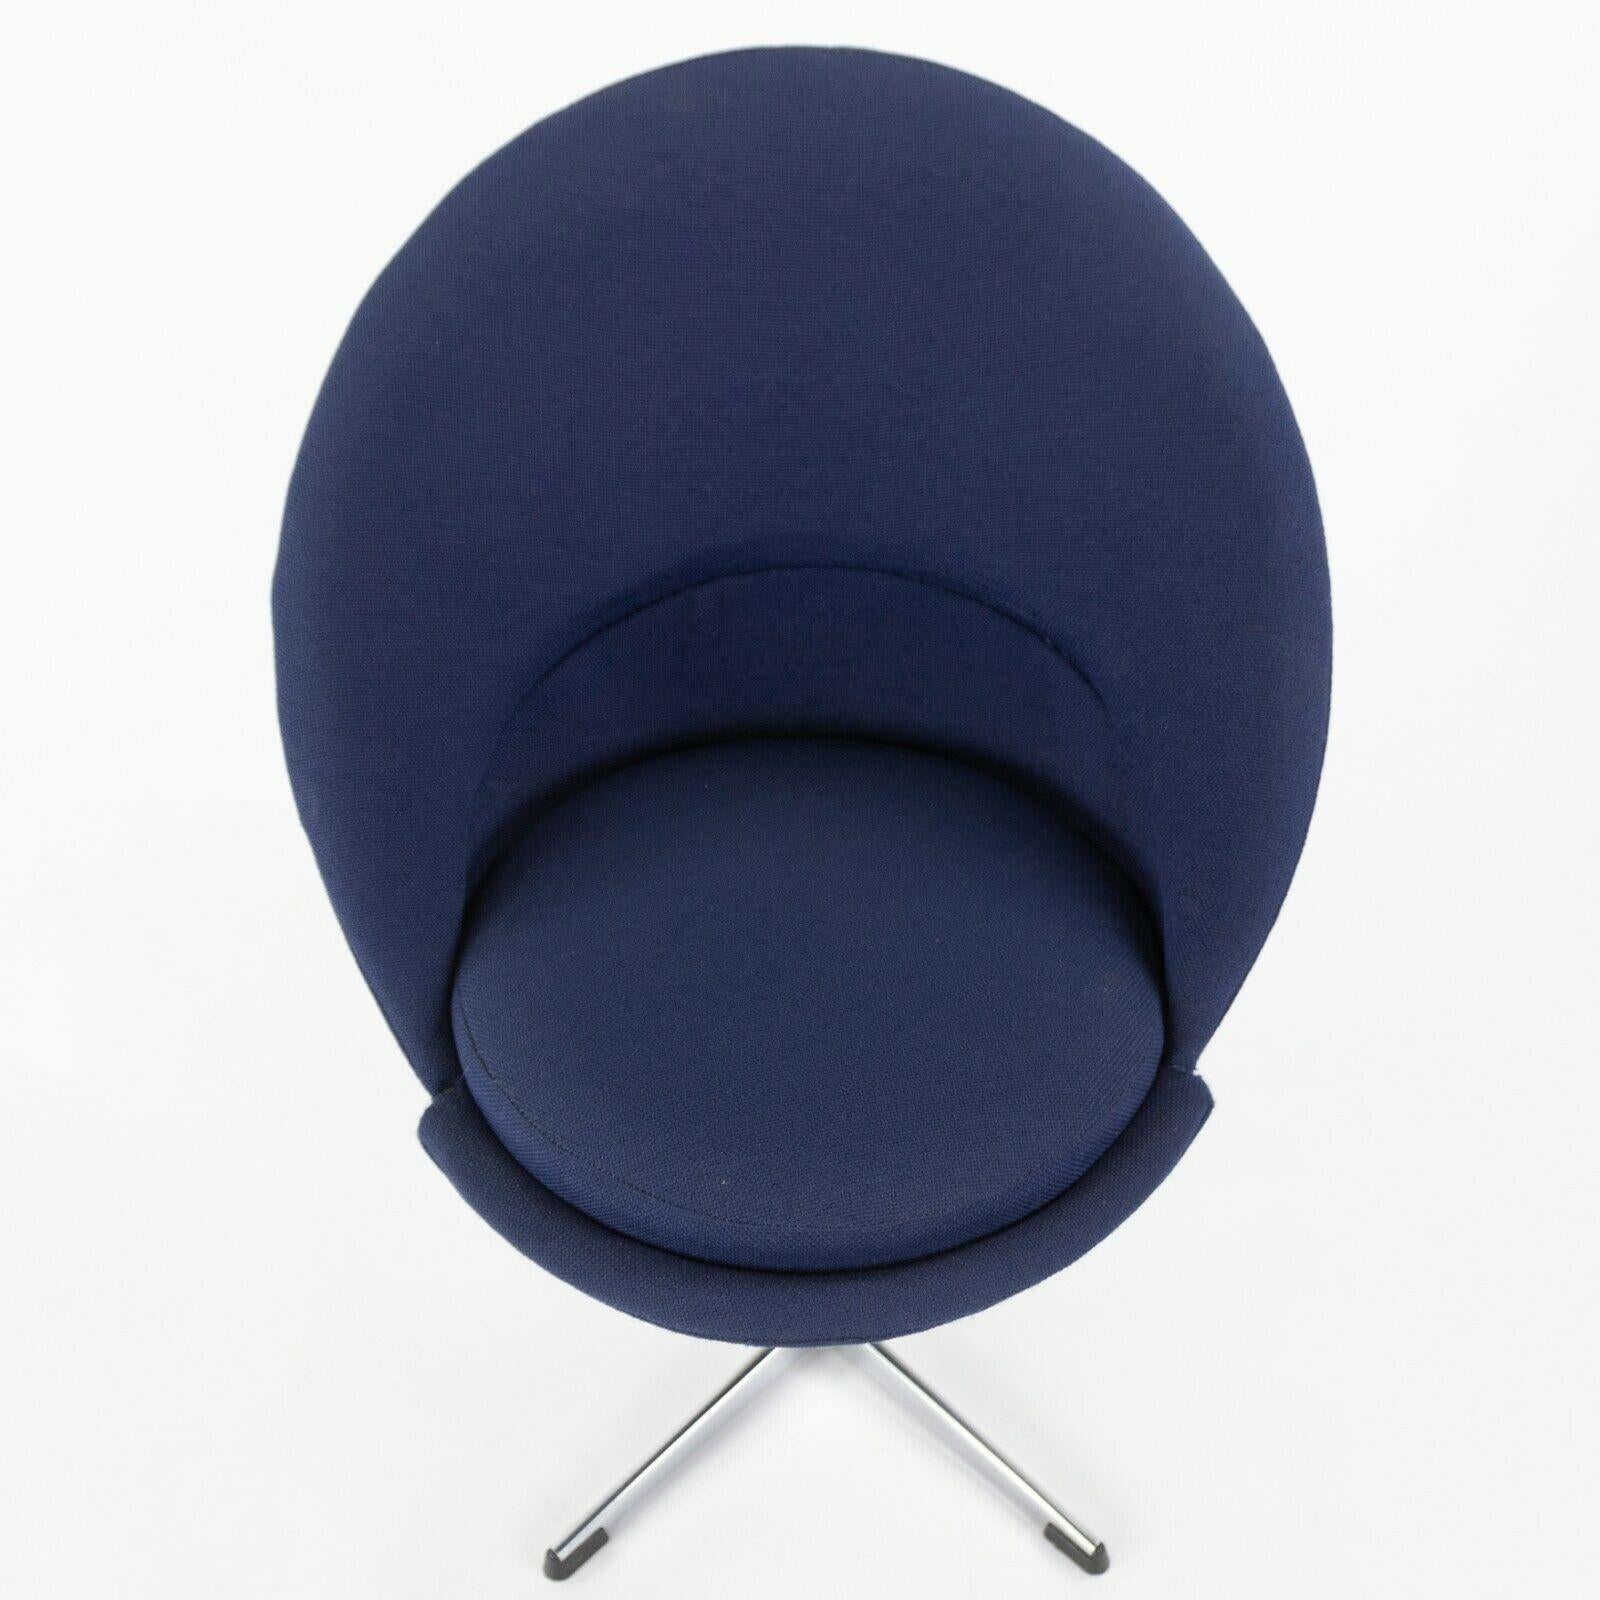 1960s Verner Panton Cone Chair Blue Fabric Made in Denmark for Plus-Linje Vitra 2